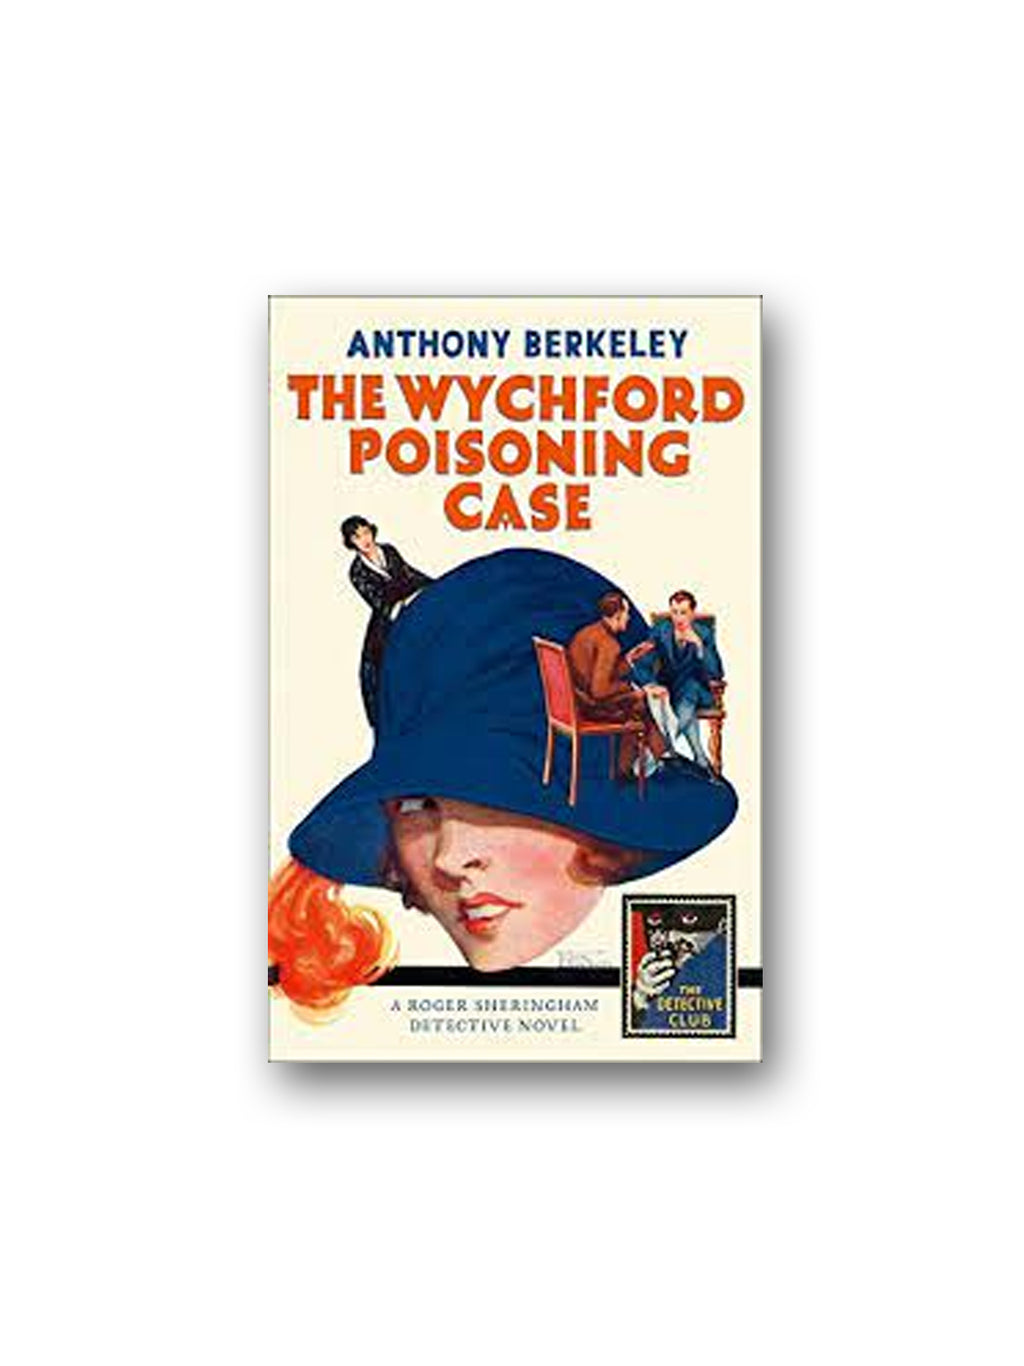 The Wychford Poisoning Case